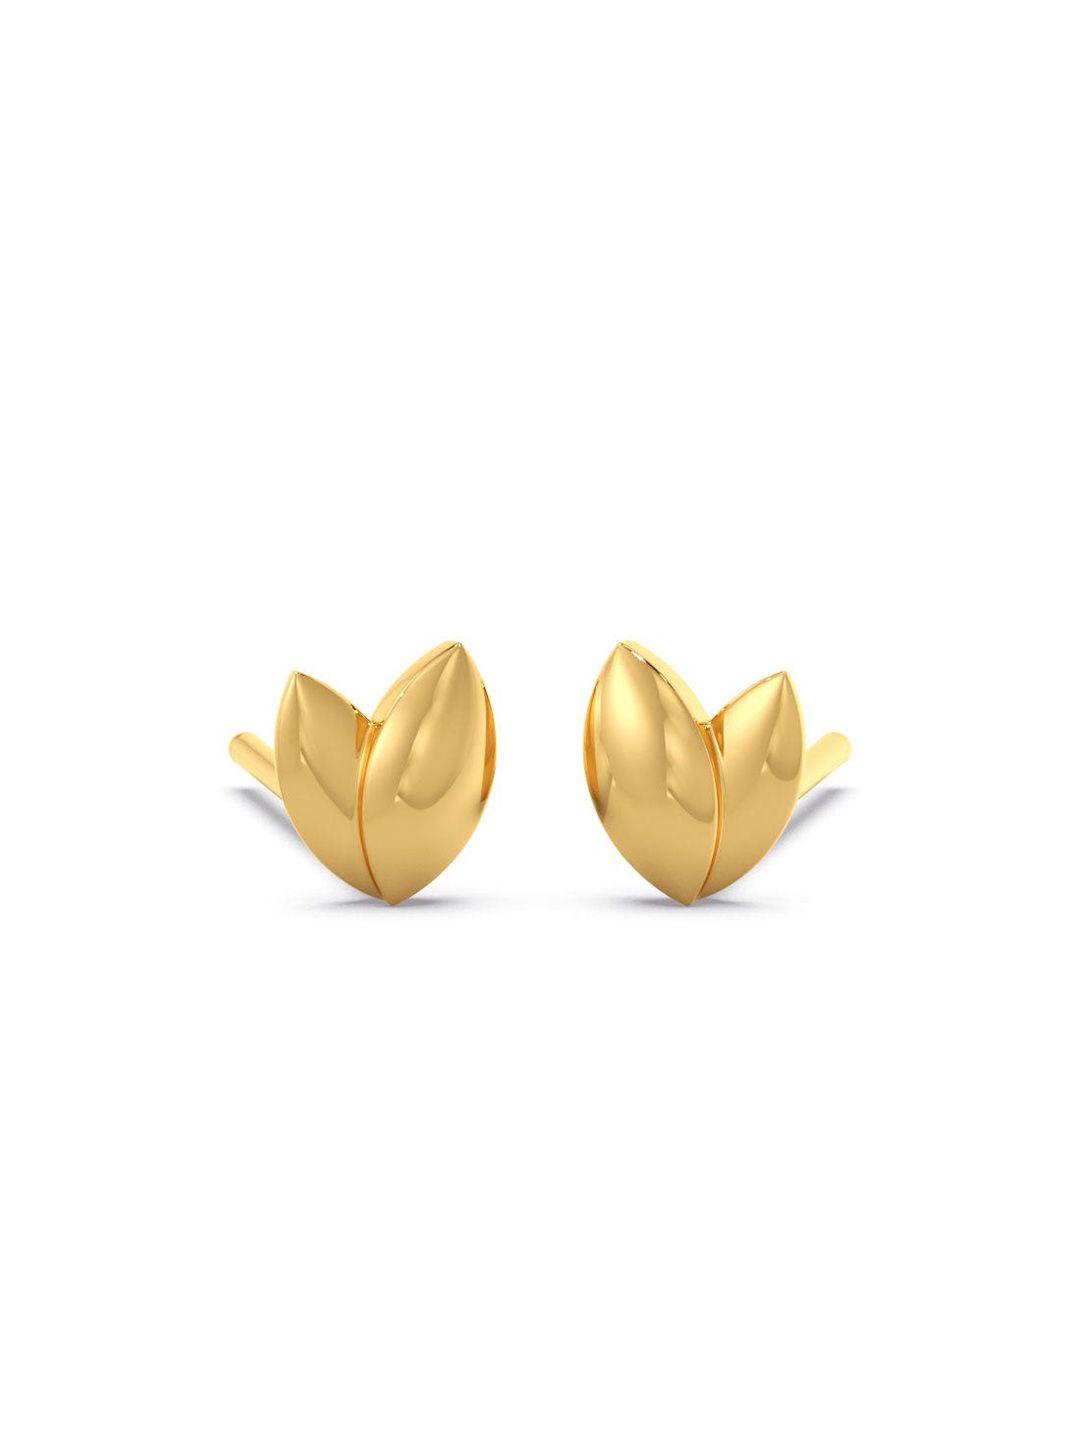 CANDERE A KALYAN JEWELLERS COMPANY 14KT Gold Earrings-0.31gm